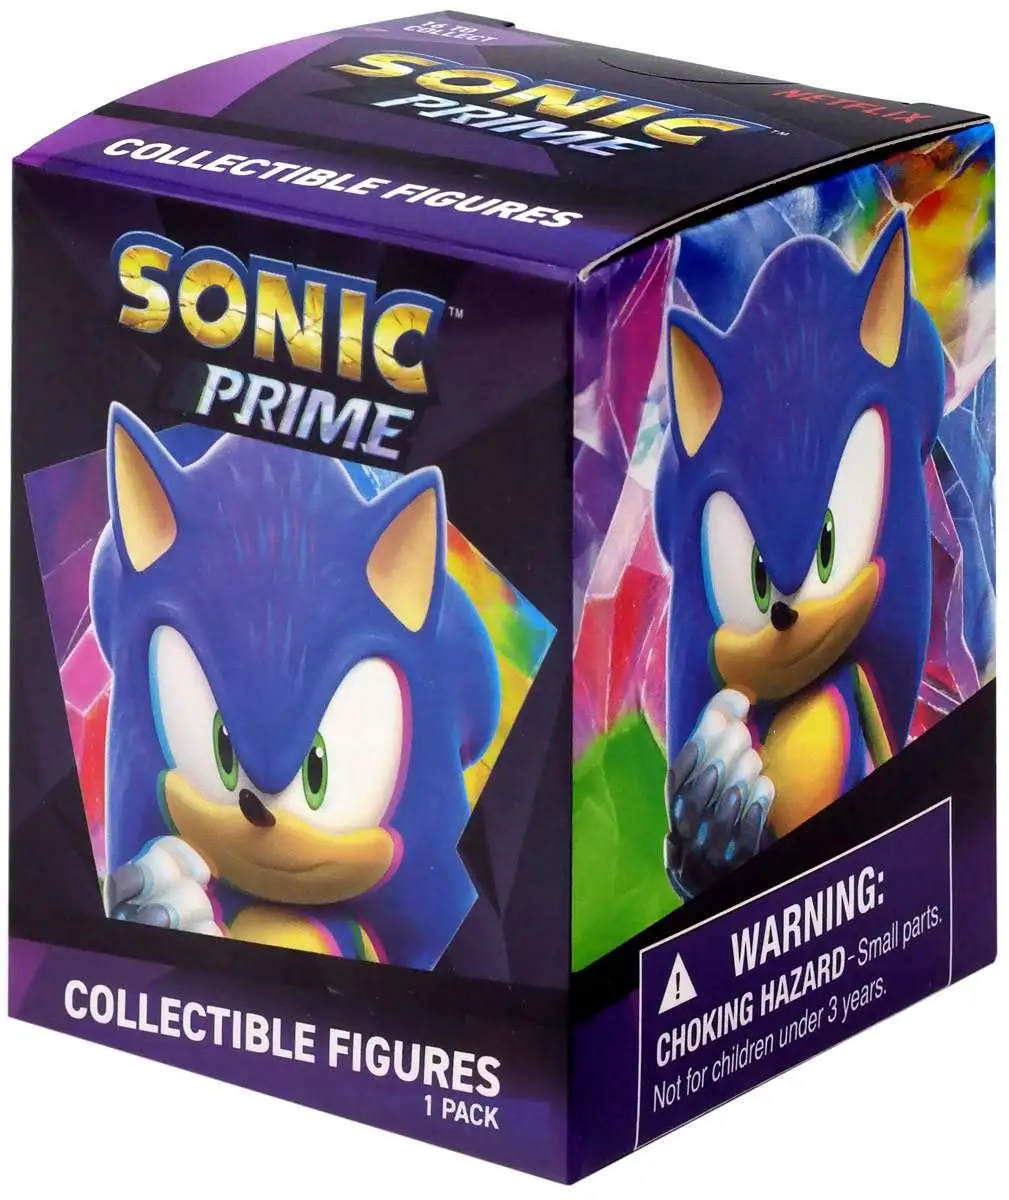 Super Shadow Sonic the Hedgehog Collectible Action Figure 2.5